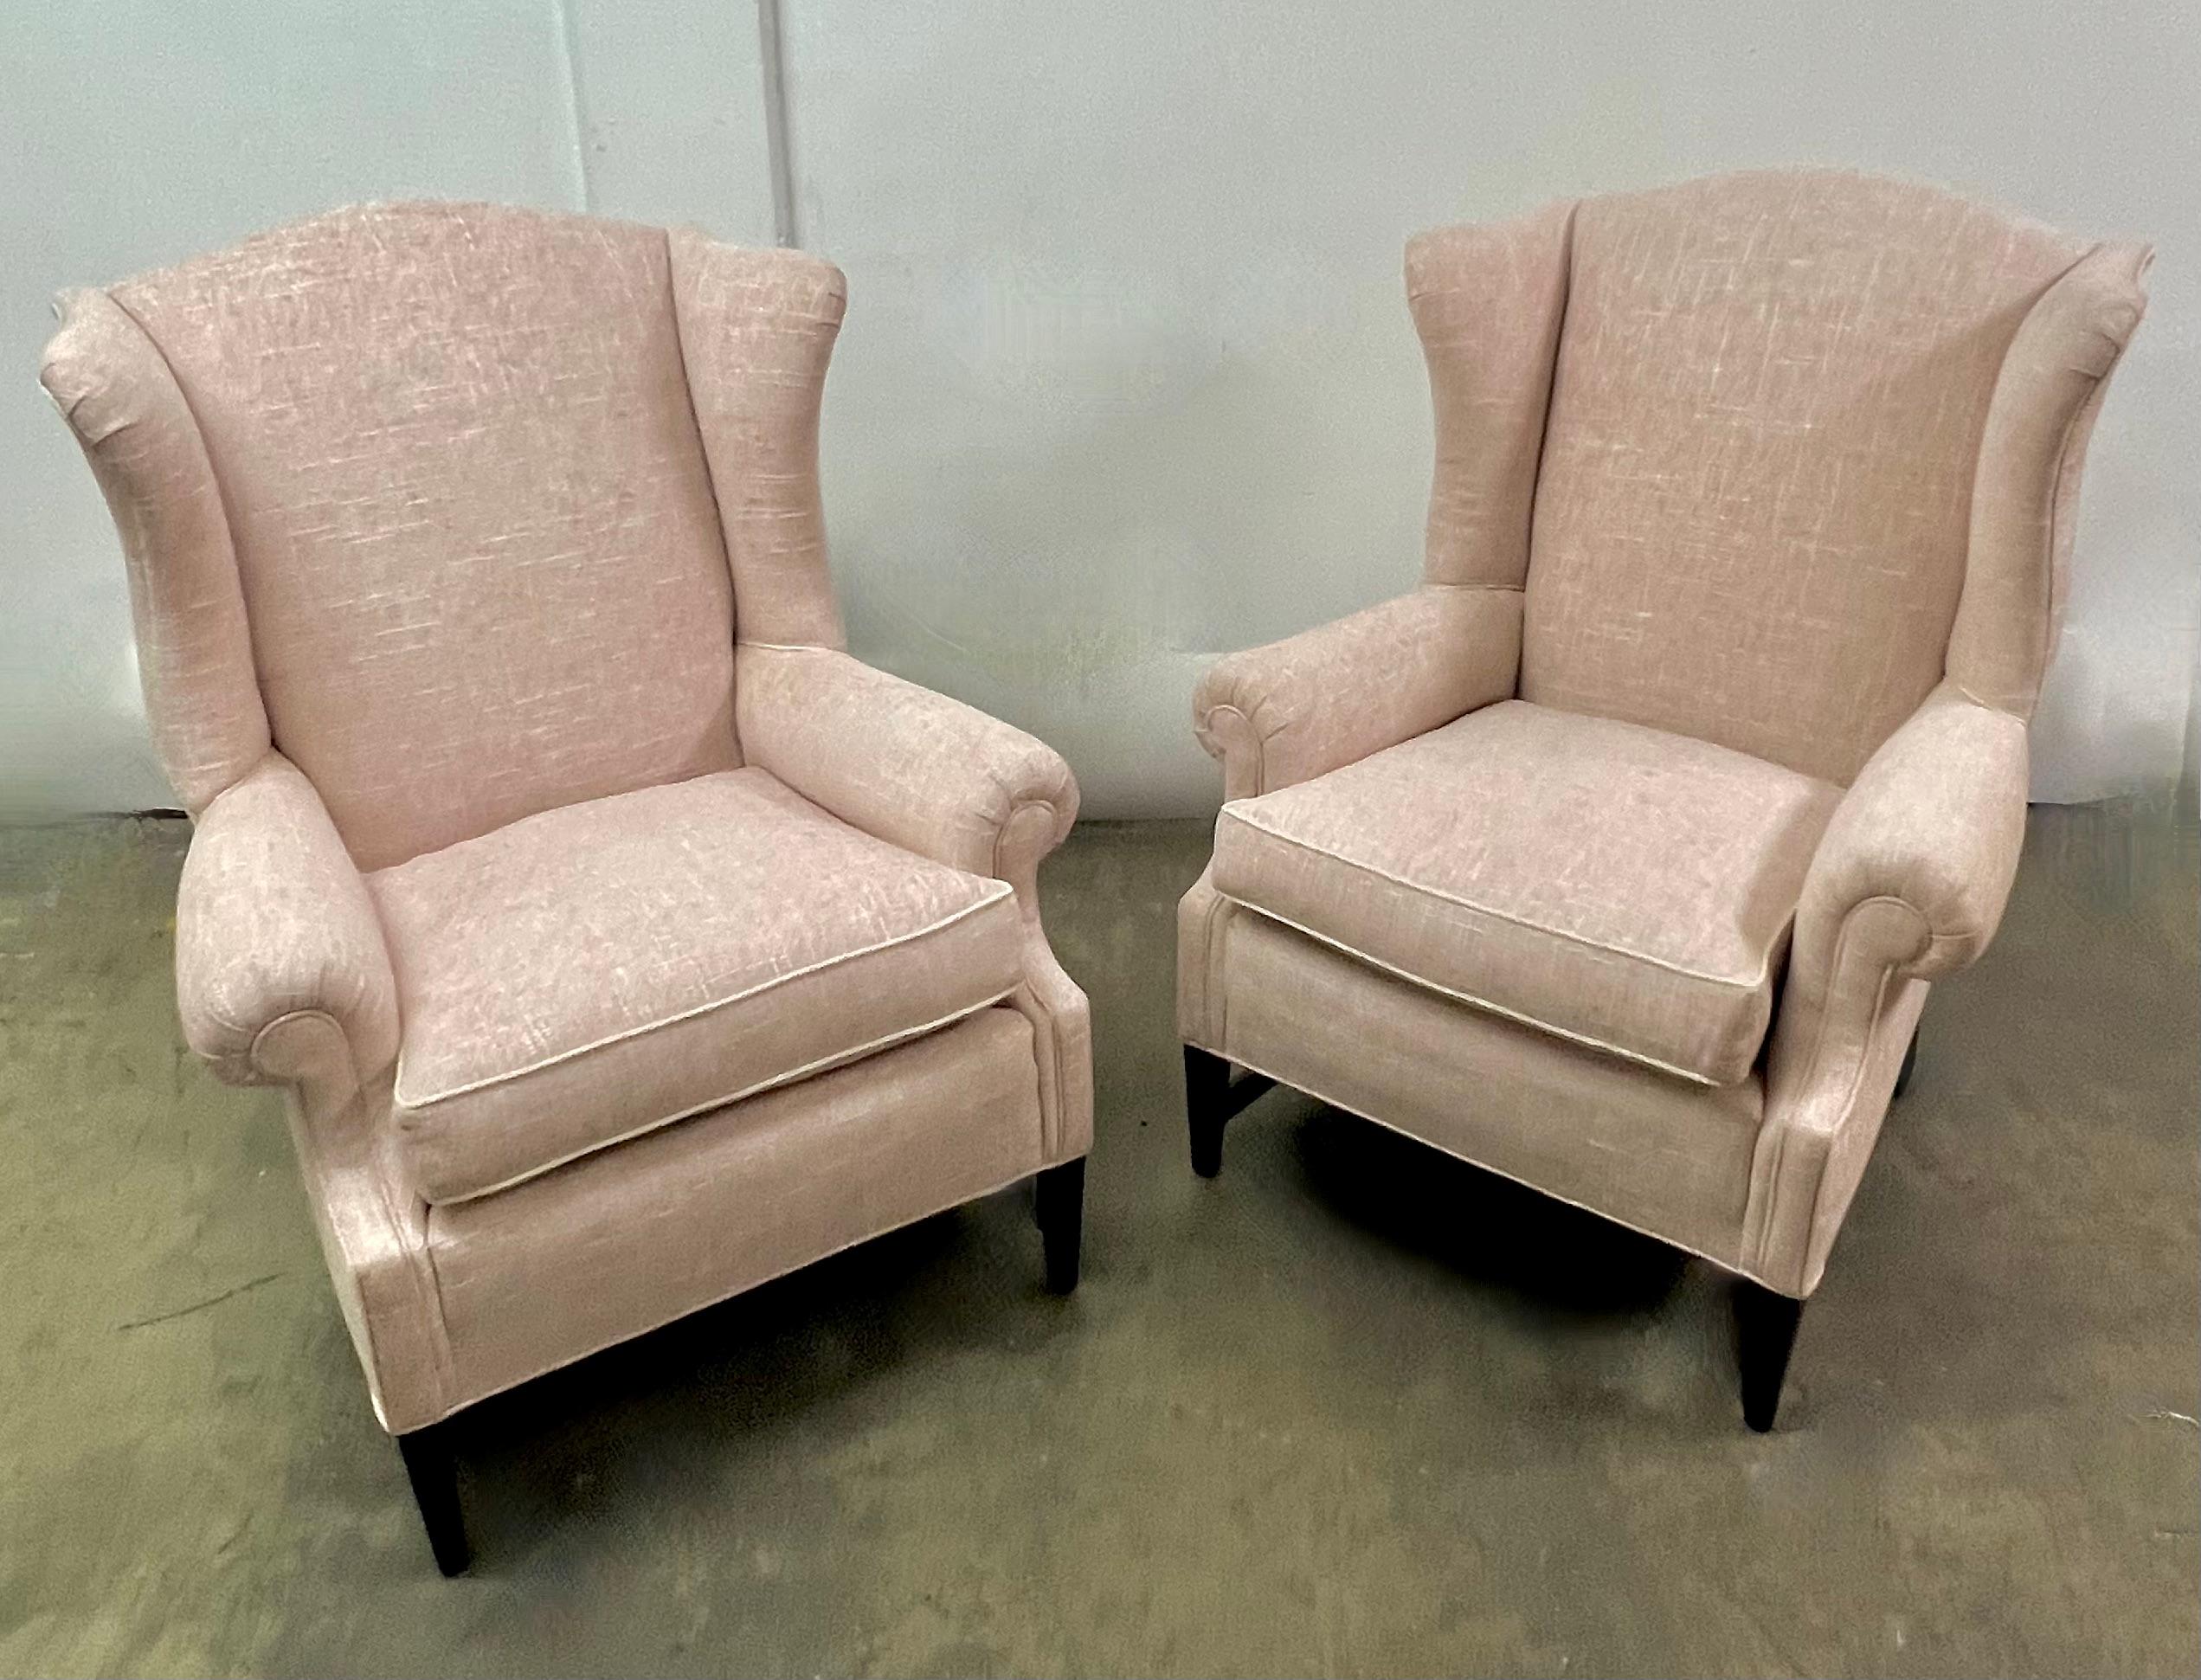 Pair of Wing Back Chairs in the Style of Georgian.  Newly upholstered in Linen with a cord welt to the cushions.  A wonderful pair and very comfortable.  The linen has a pink cast and will work in many spaces.  A nice deep and very attractive wing